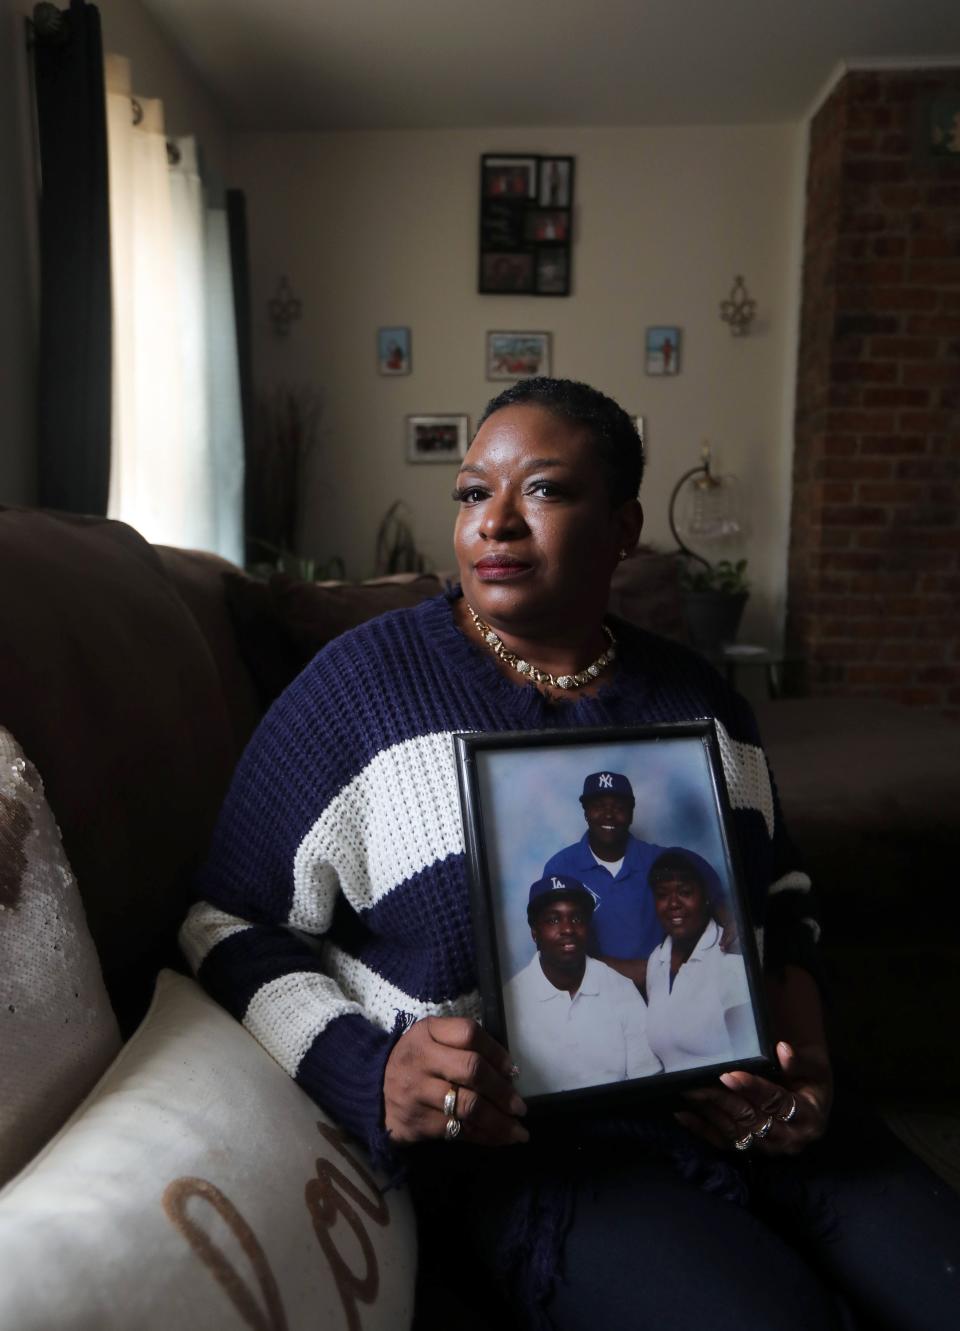 Desiree Chambers, 52, of Troy, N.Y. holds a portrait of her children April 6, 2022.